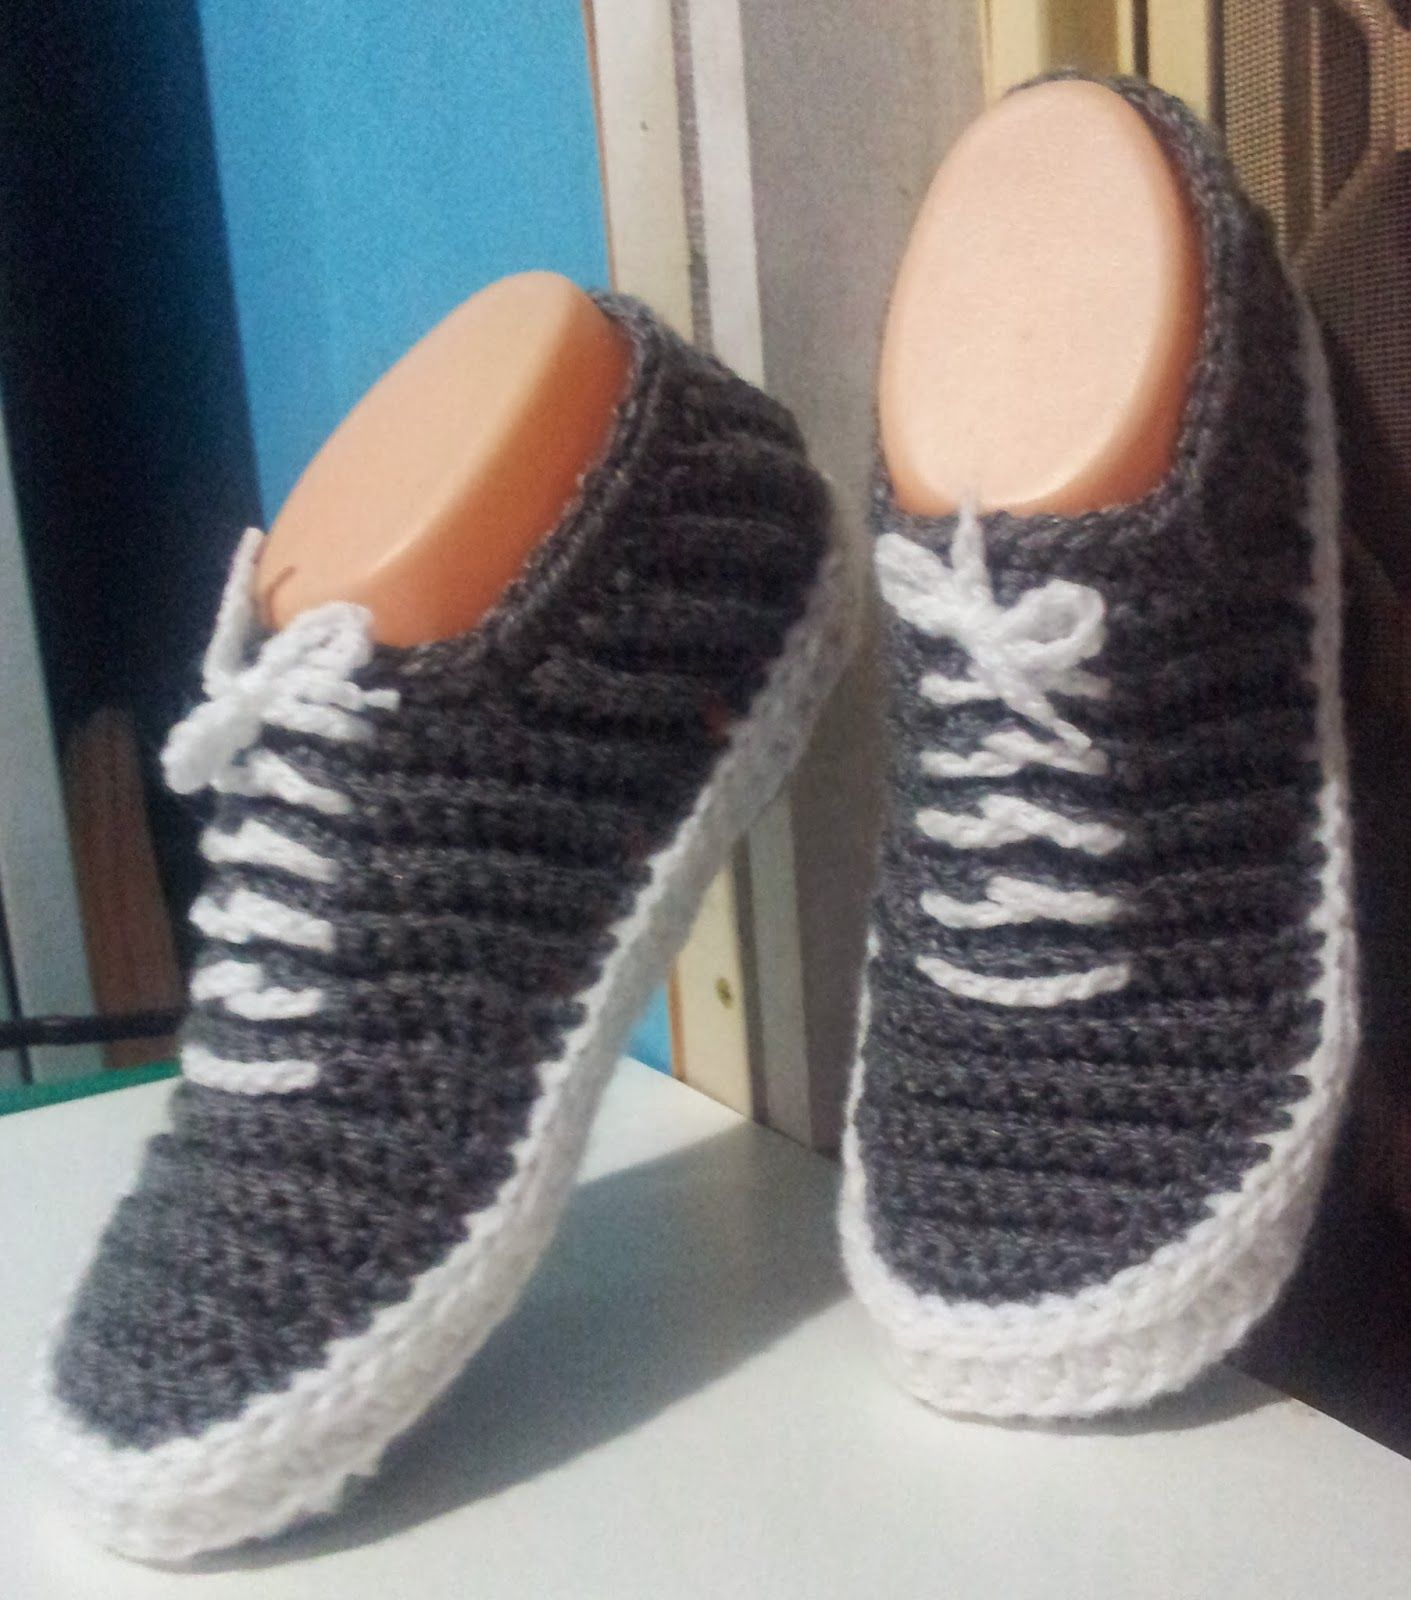 Crochet Sneakers Pattern Vans Crochet Slippers Pdf Pattern Why Am I Finding This